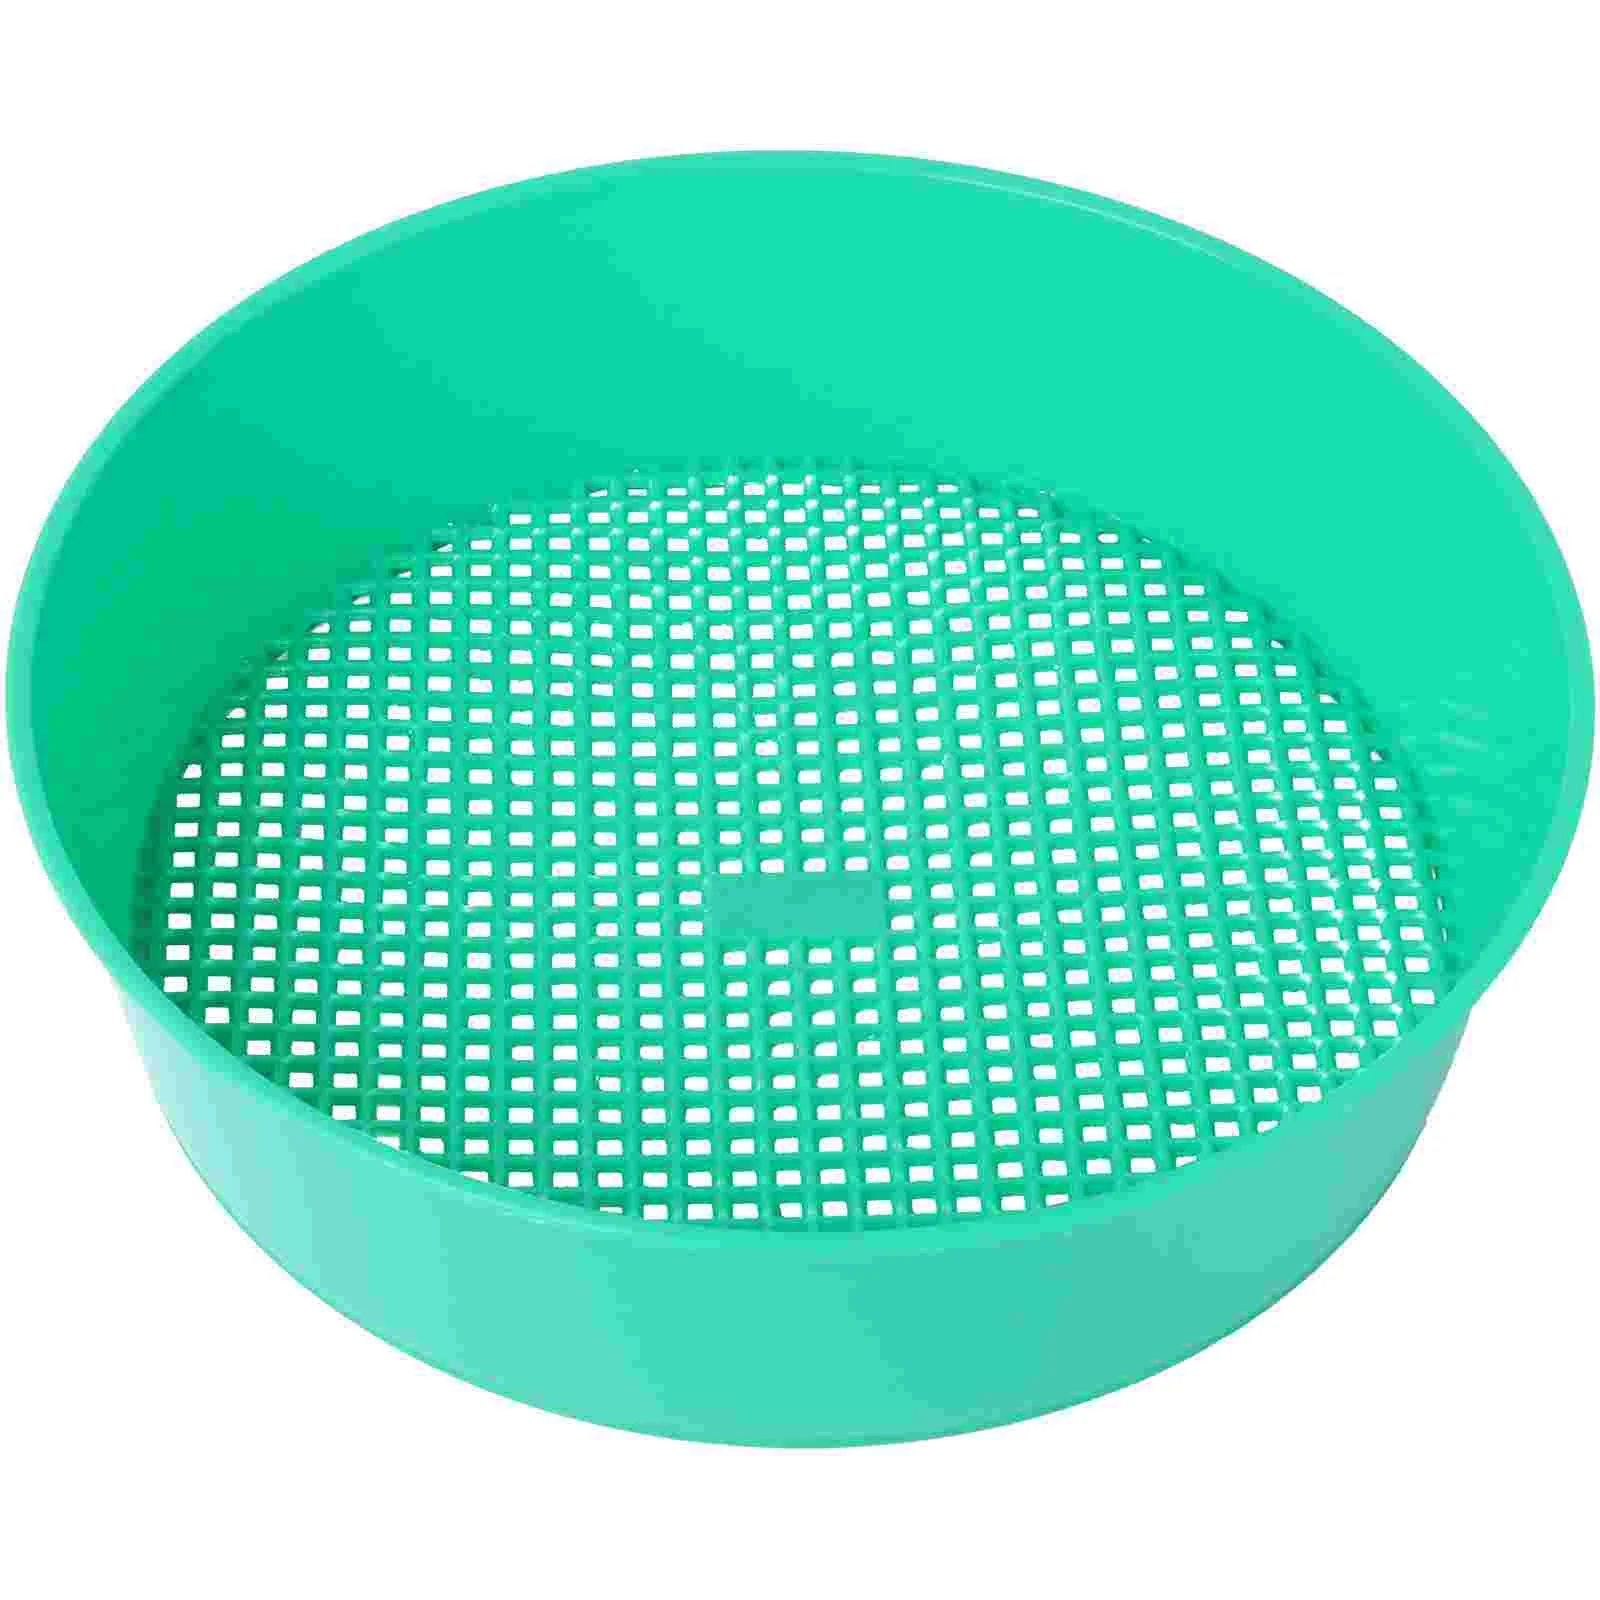 

Sieve Soil Garden Sifter Mesh Pan Sifting Riddle Sand Gardening Compost Filter Sieves Classifier Tool Screen Fine Mining